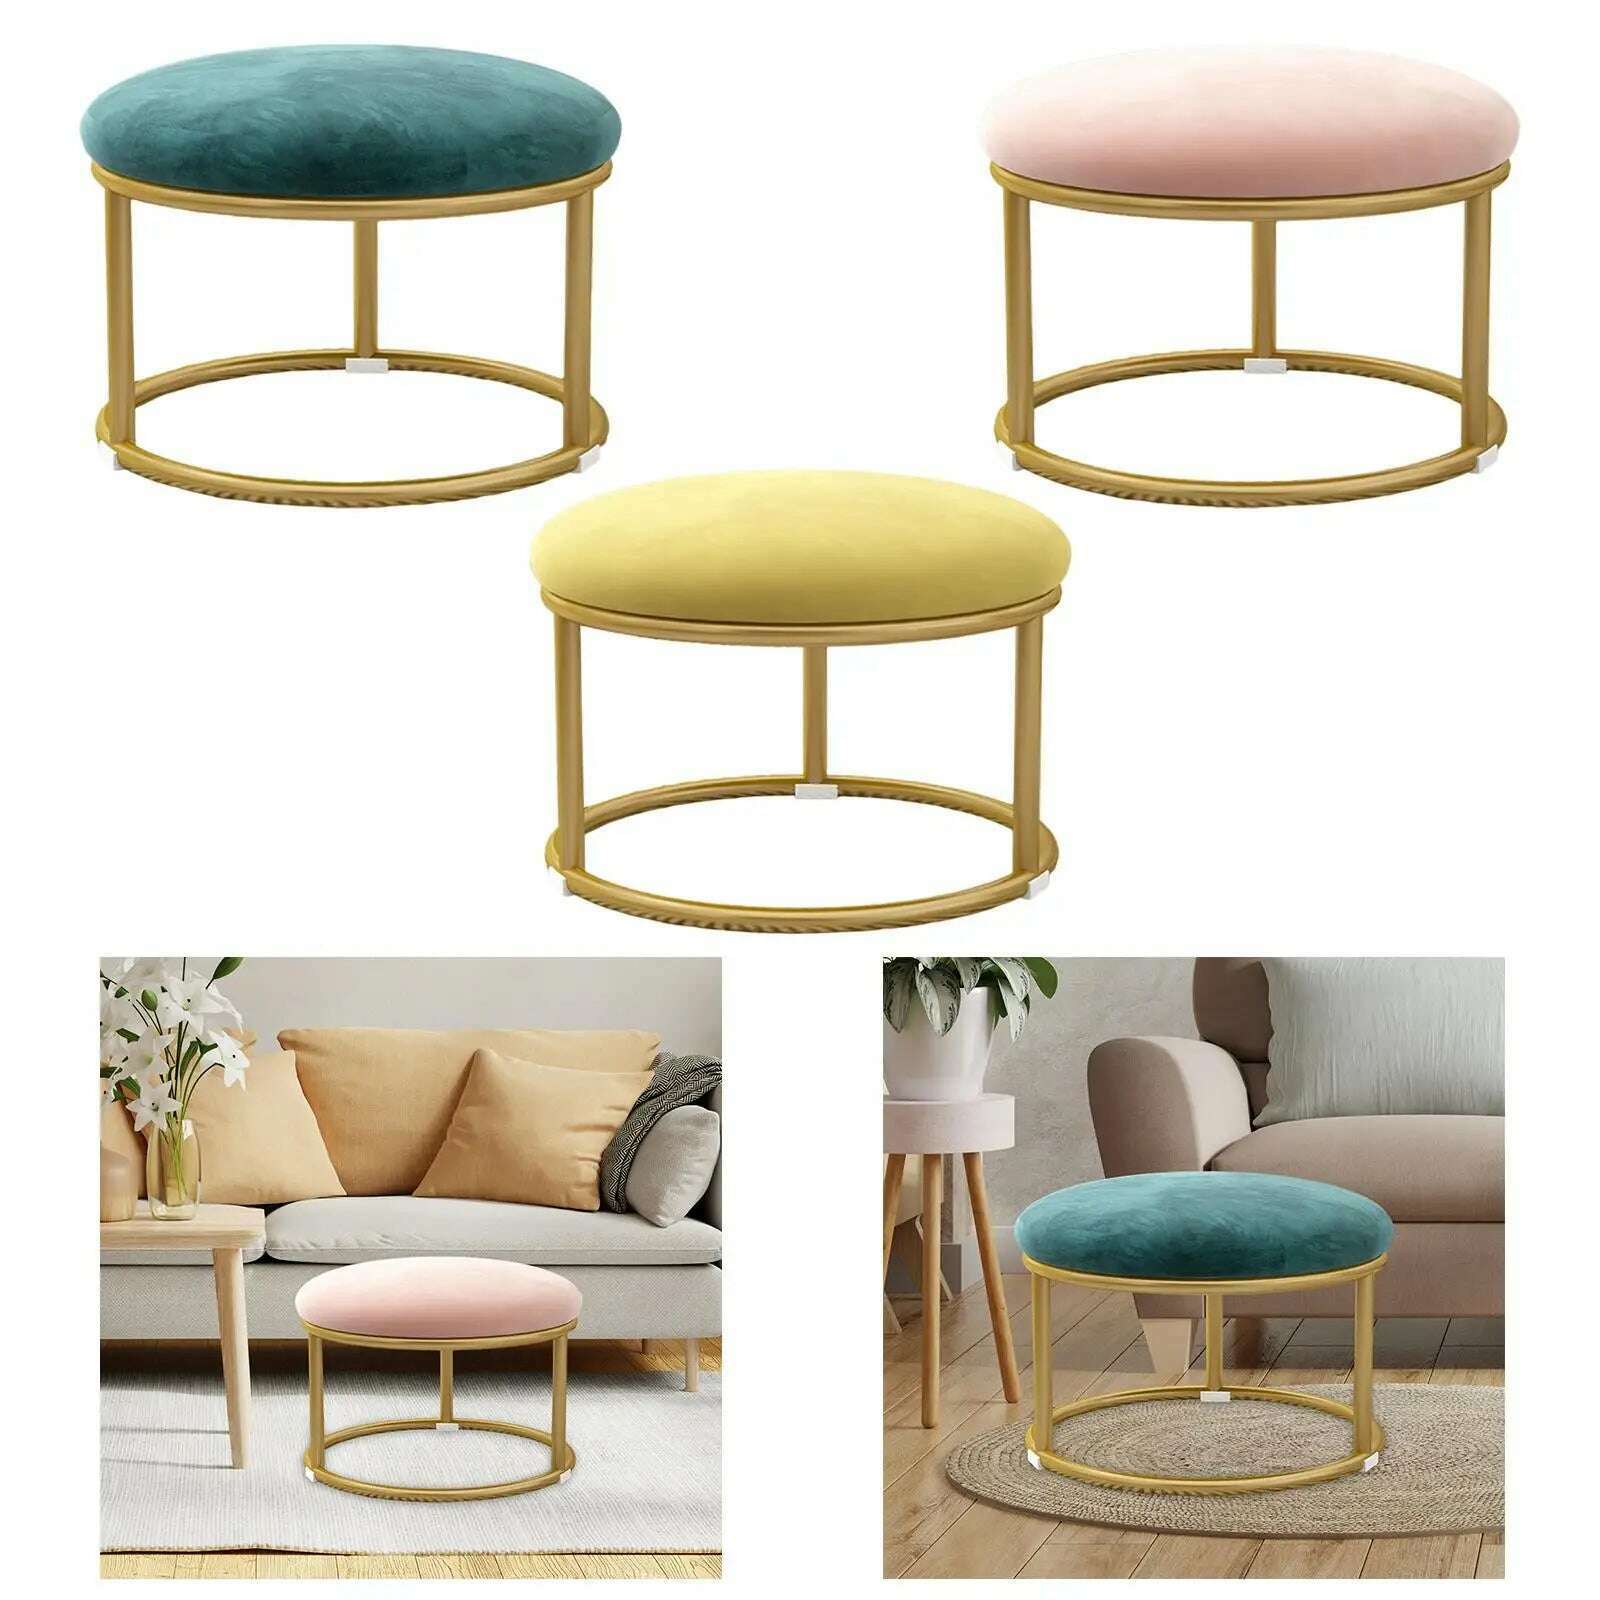 KIMLUD, Small Footstool Chair Stable Shoe Changing Stool Sofa Tea Stool Stylish Ottoman for Living Room Bedside Entryway Nursery Office, KIMLUD Women's Clothes